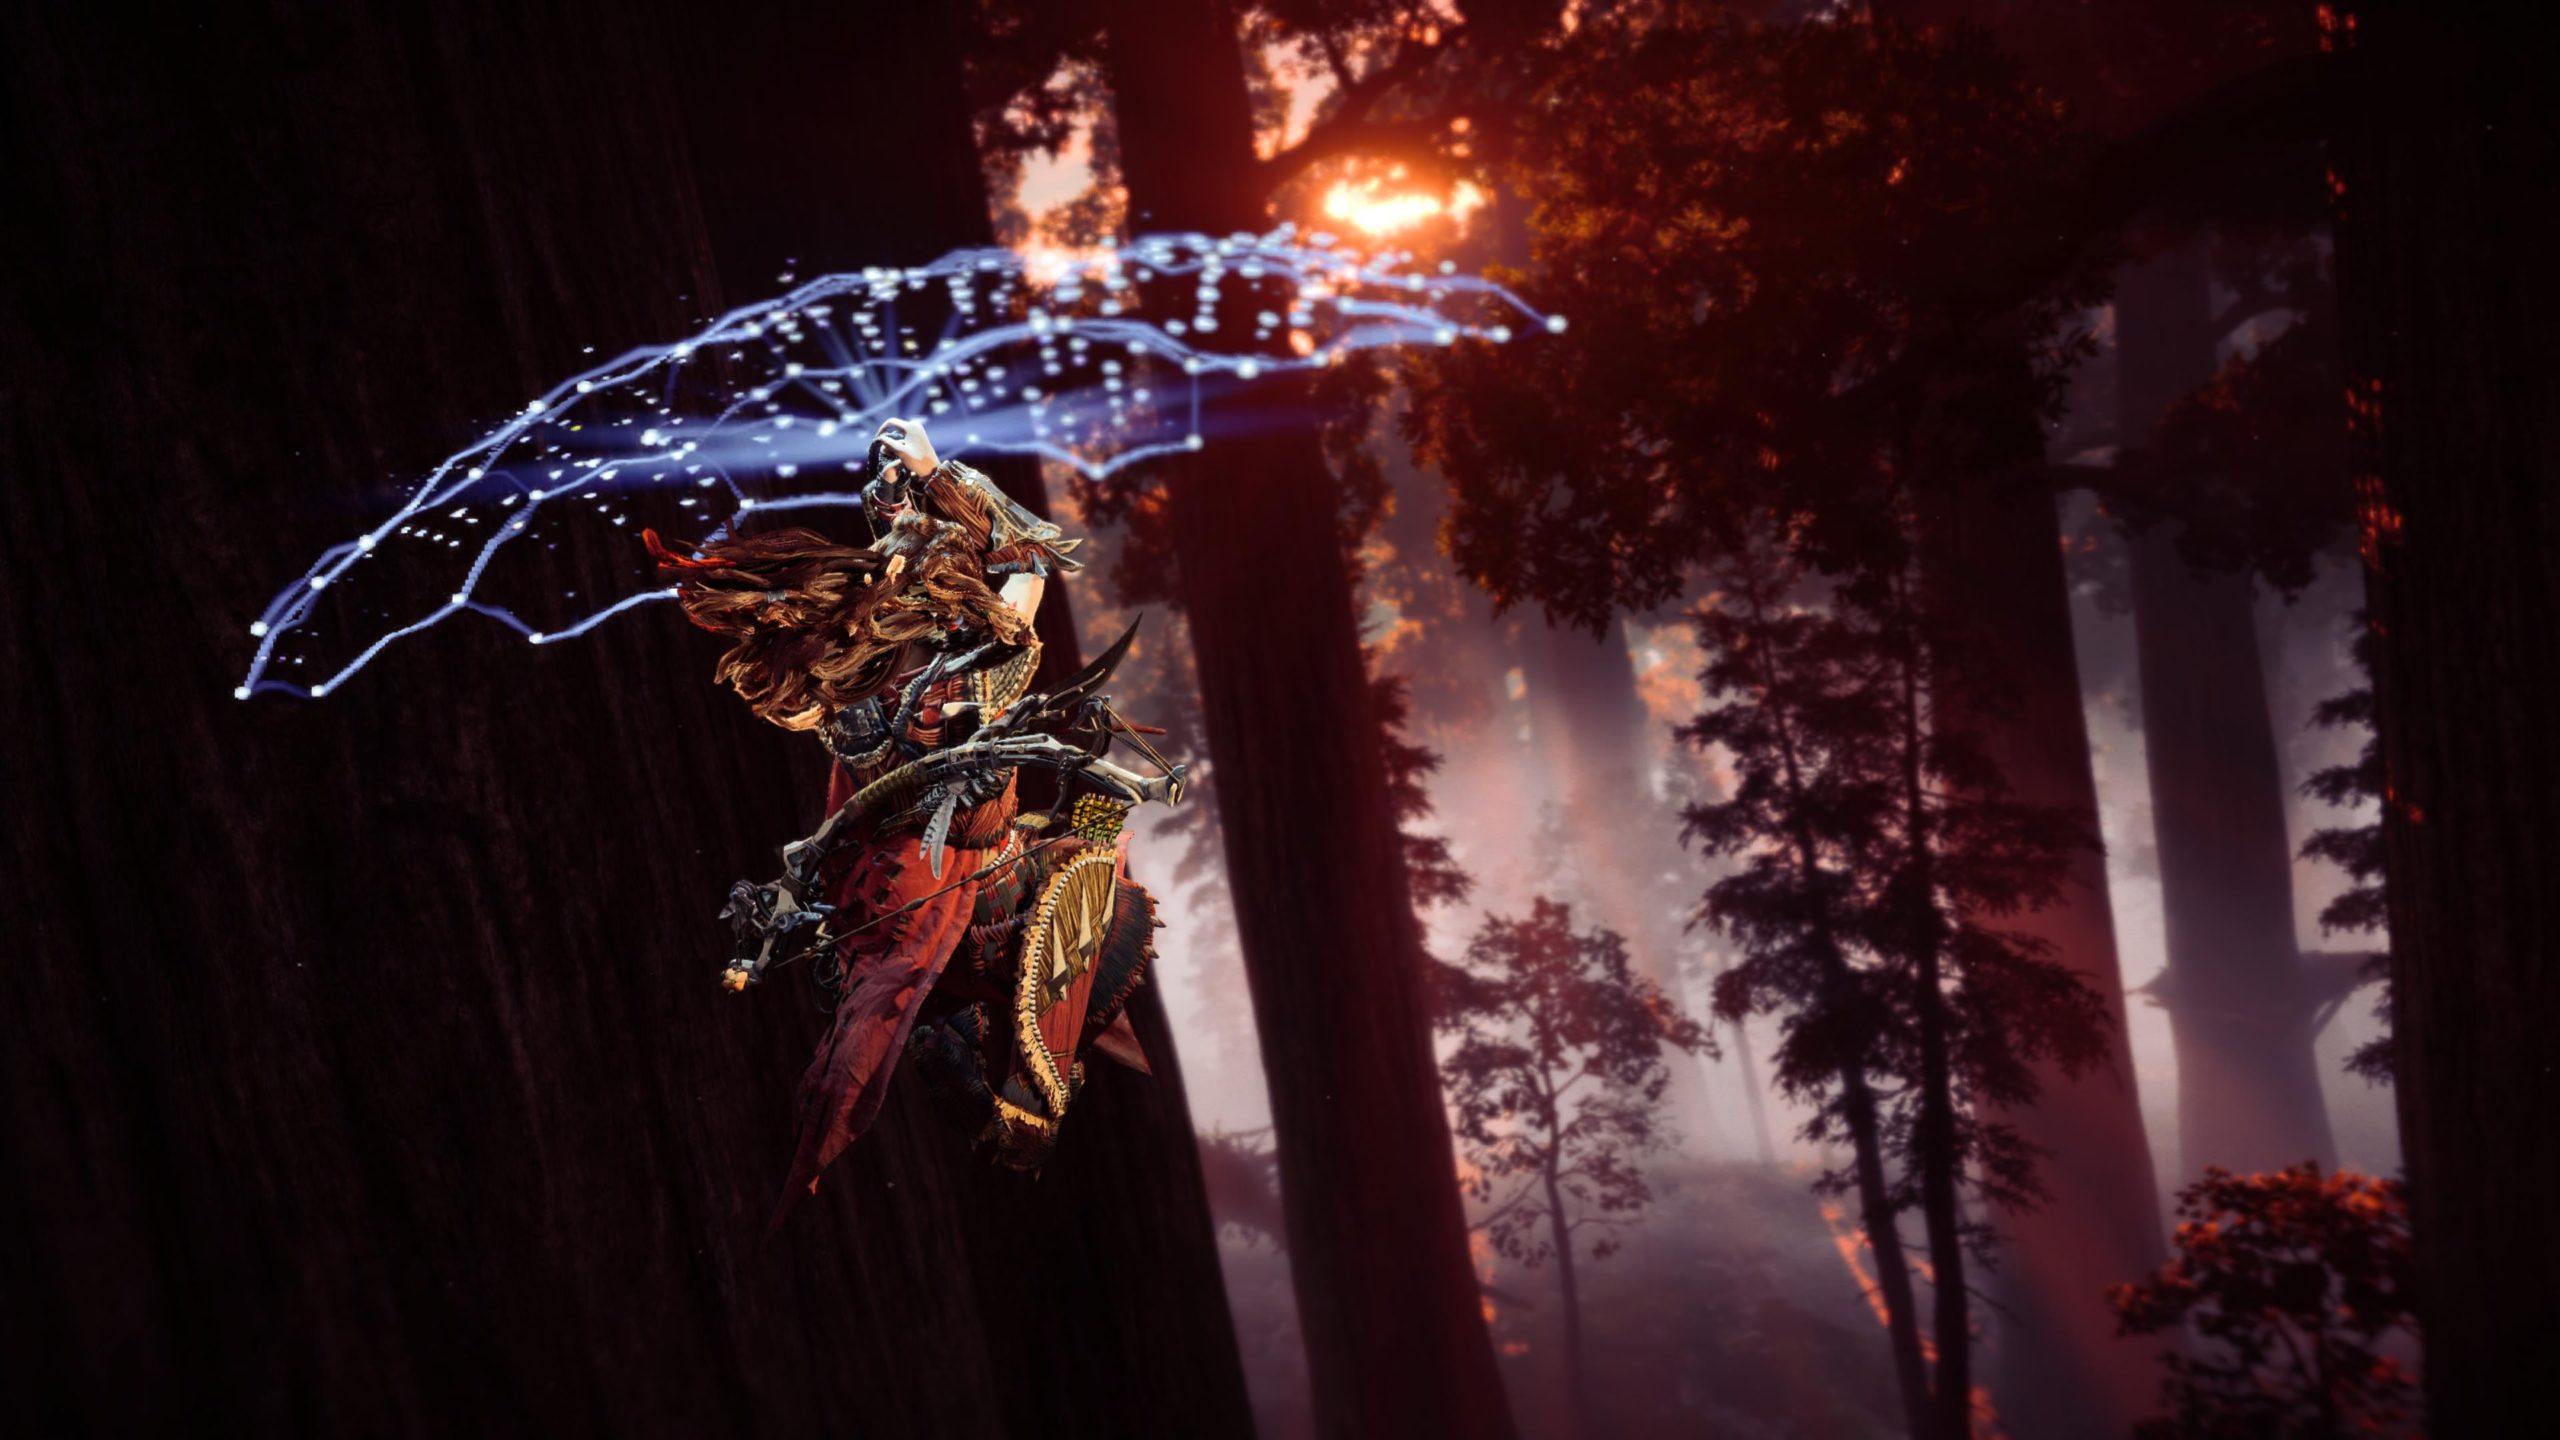 Mind, I've no bad words about the glider. This thing rules. (Screenshot: Sony / Kotaku)